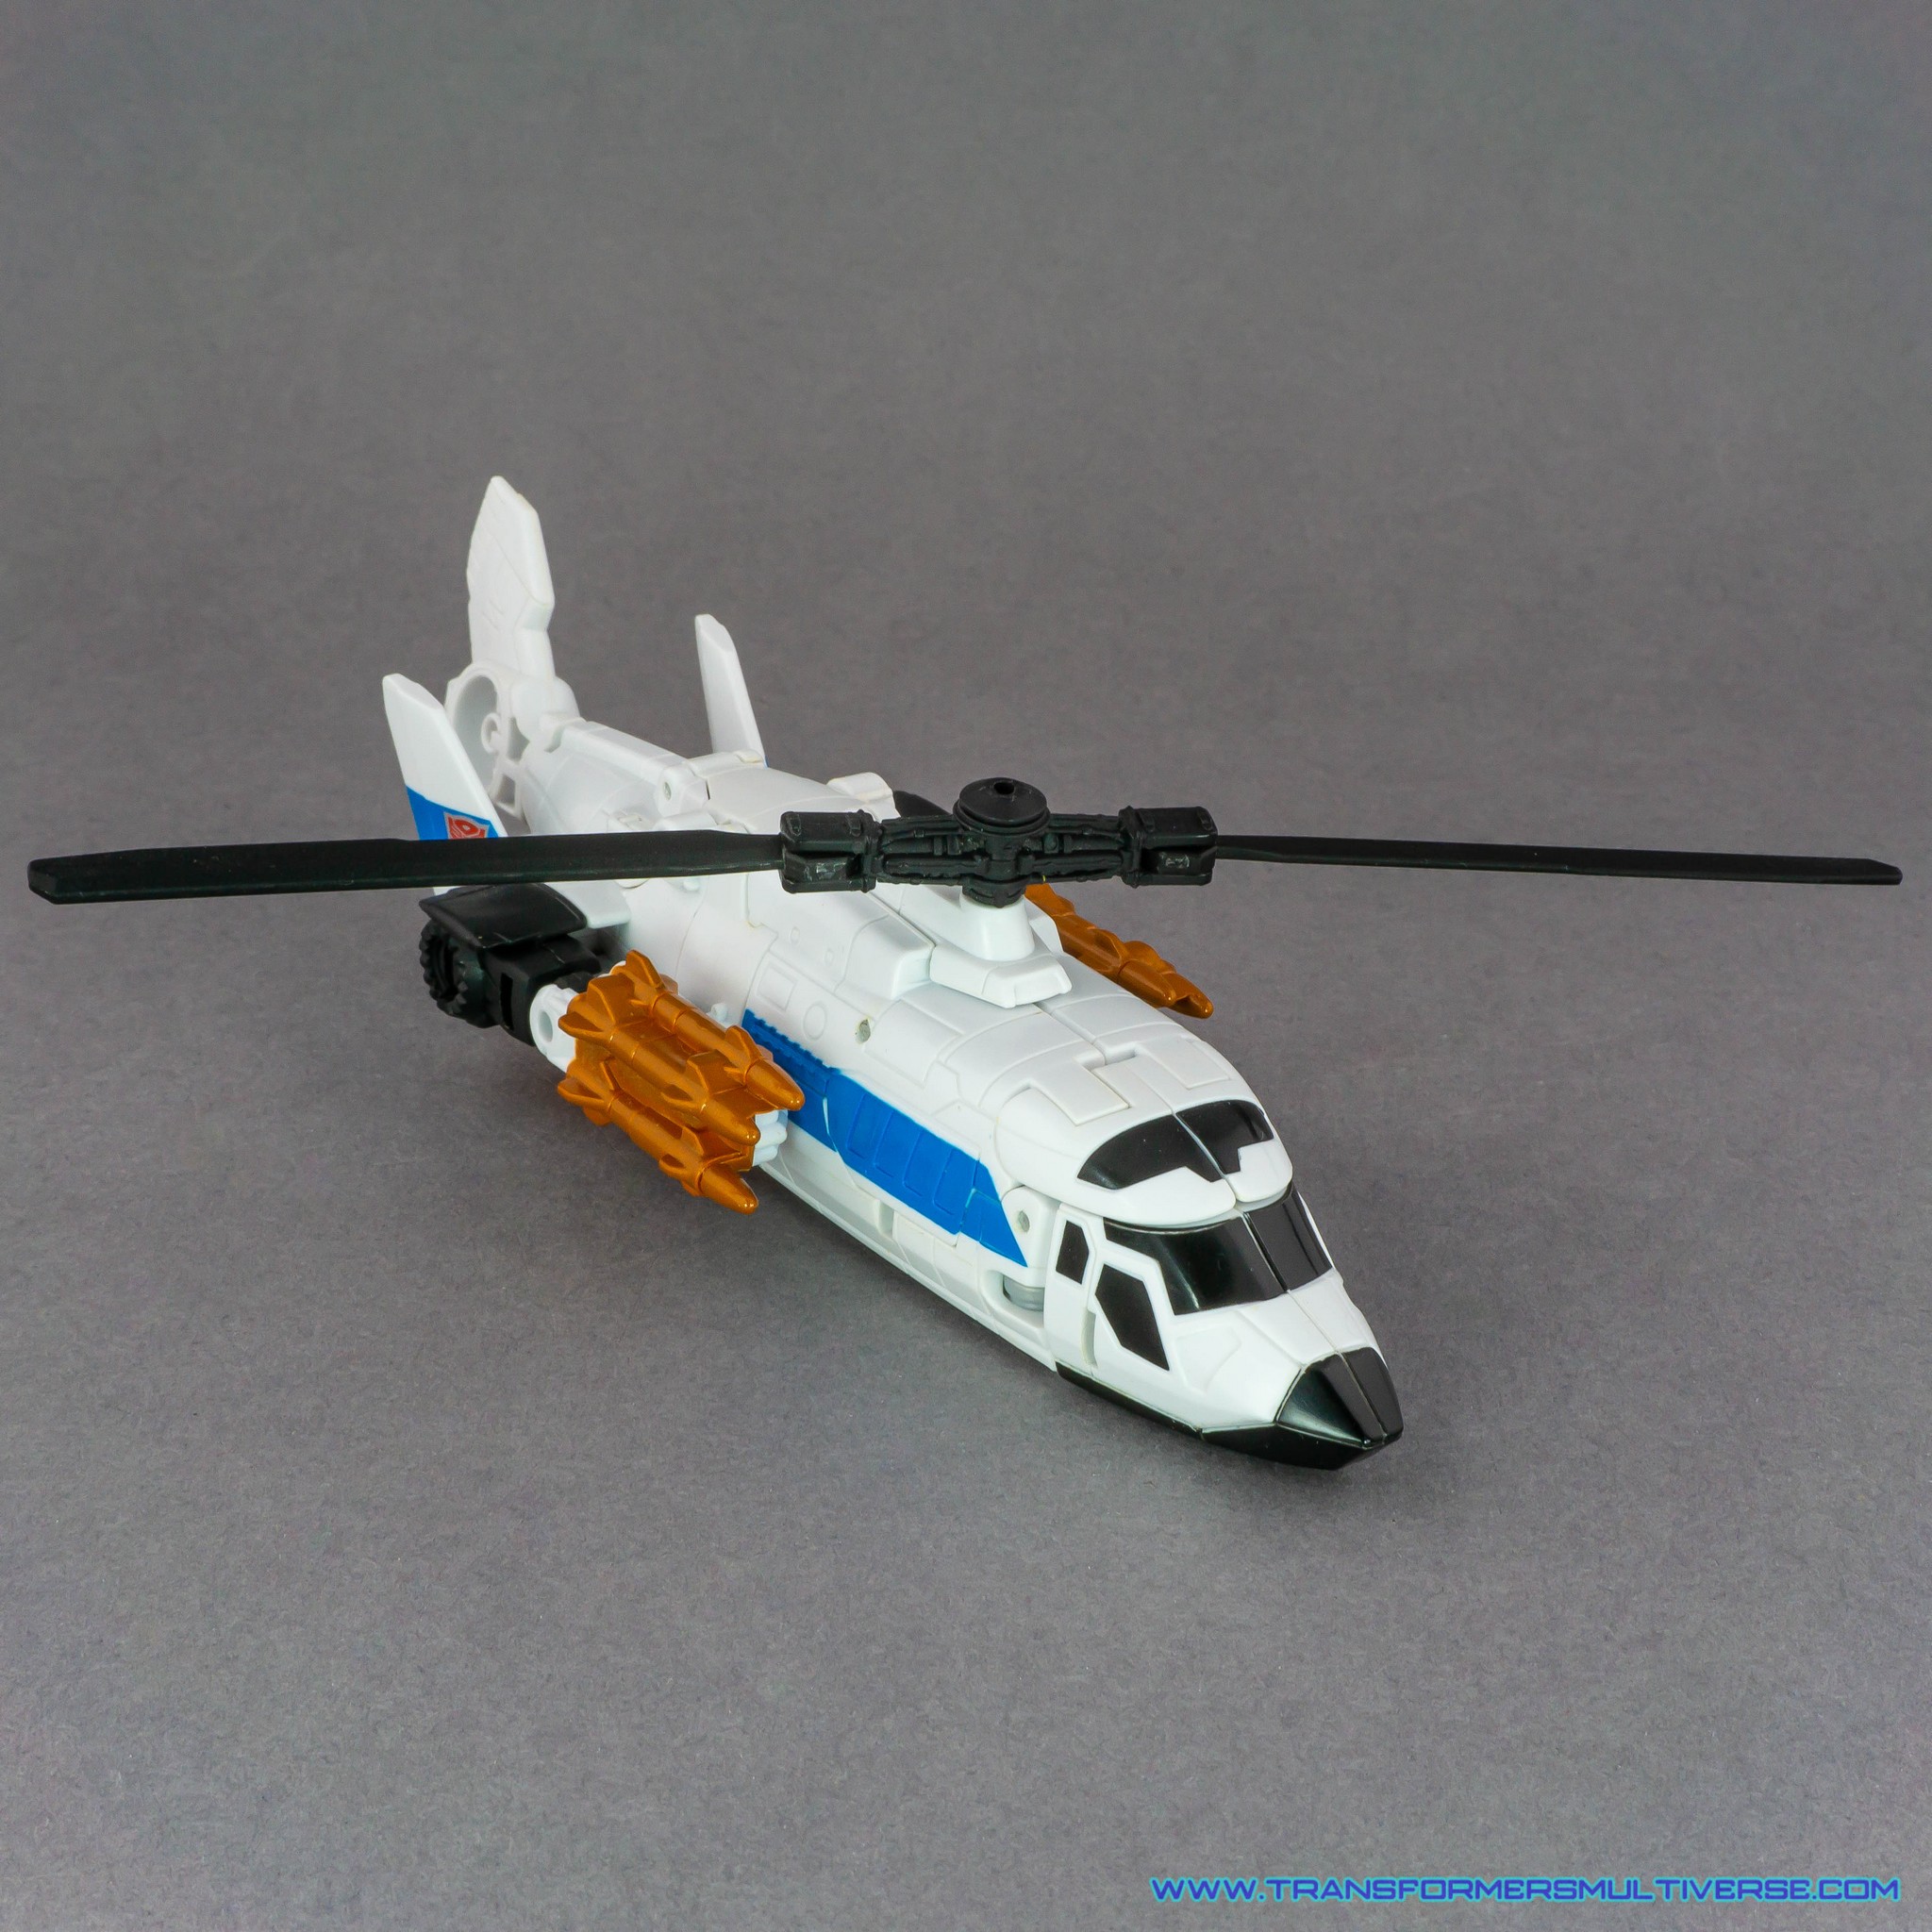 Transformers Combiner Wars Alpha Bravo Combat Helicopter mode alternate angle